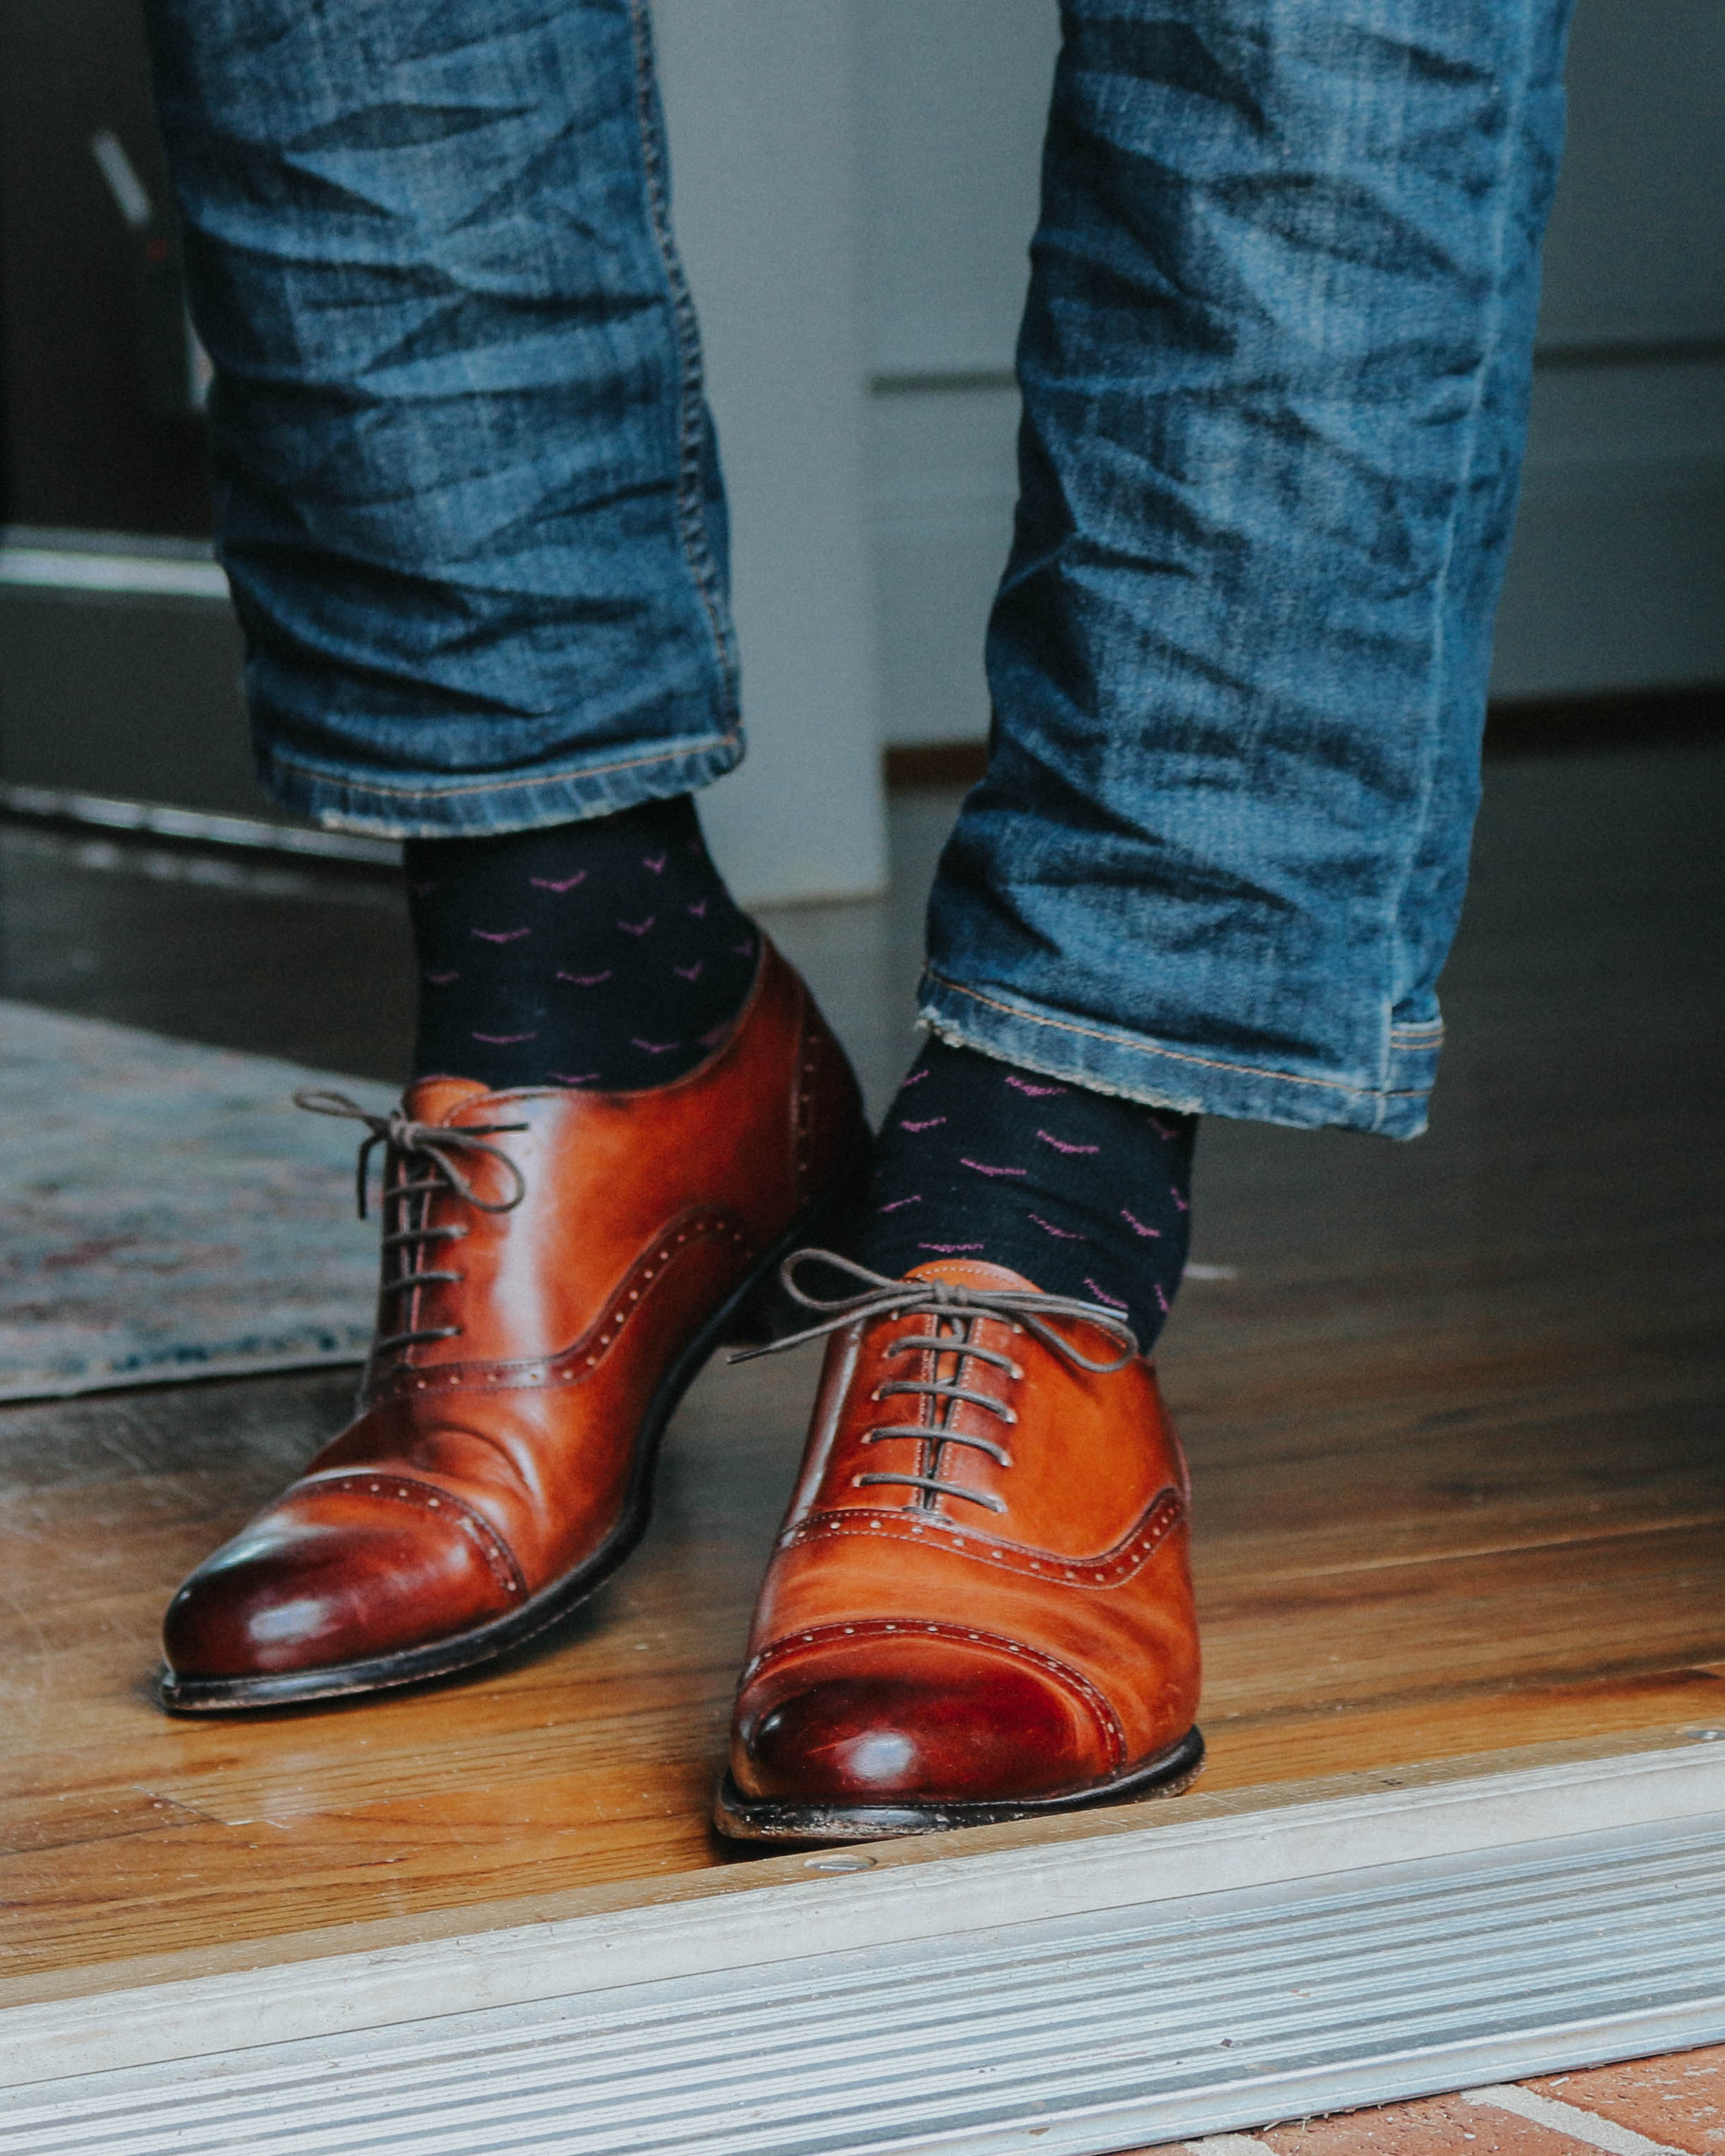 black over the calf dress socks with burgundy print, brown dress shoes, blue jeans